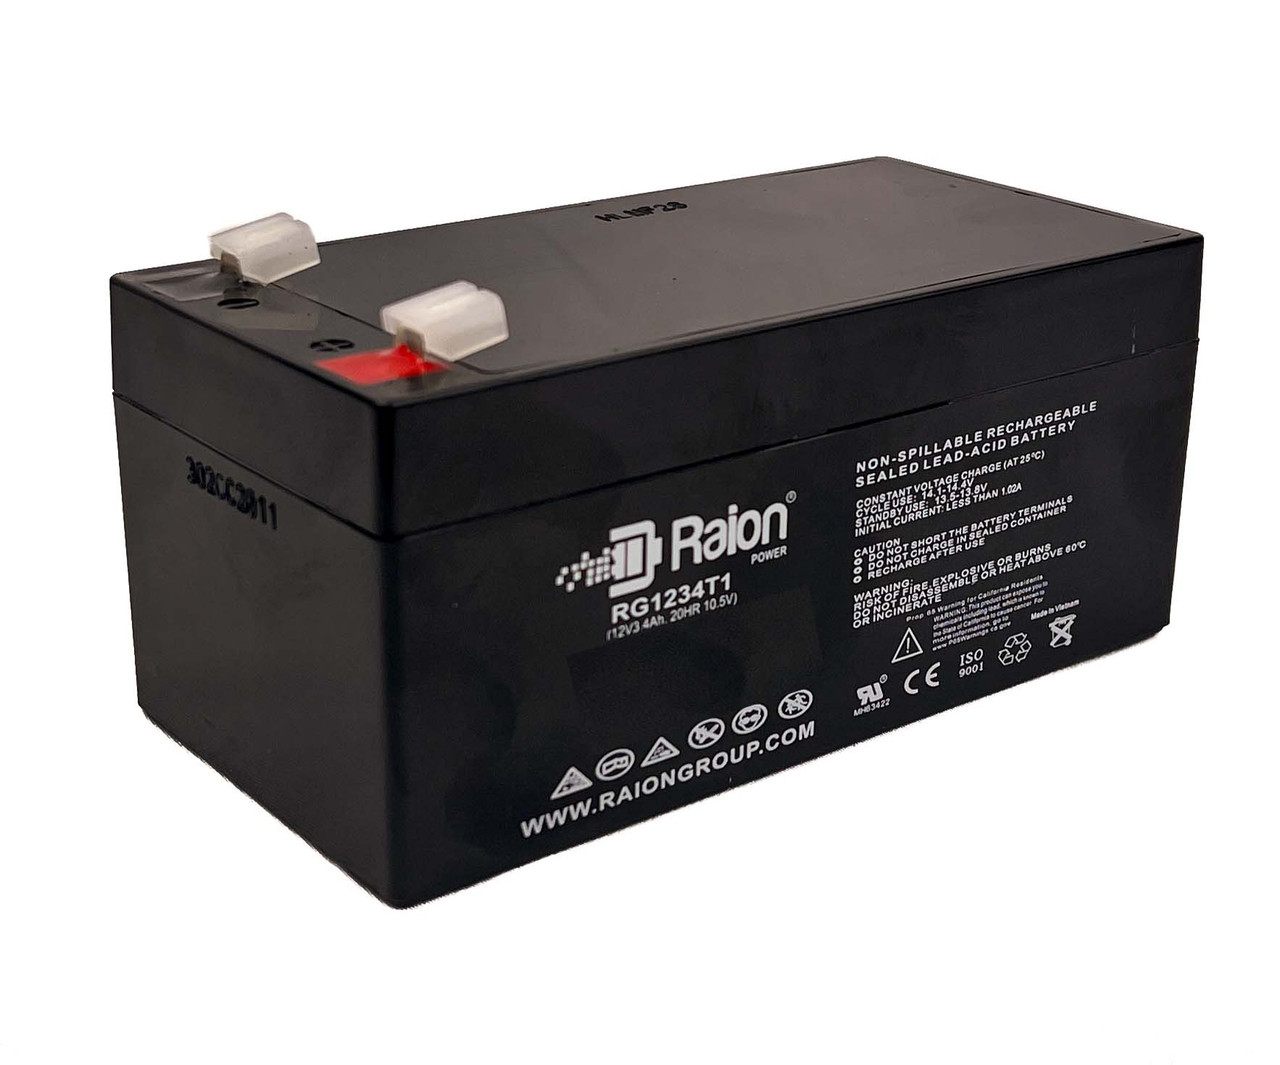 Raion Power 12V 3.4Ah Non-Spillable Replacement Battery for Topin TP12-3.3